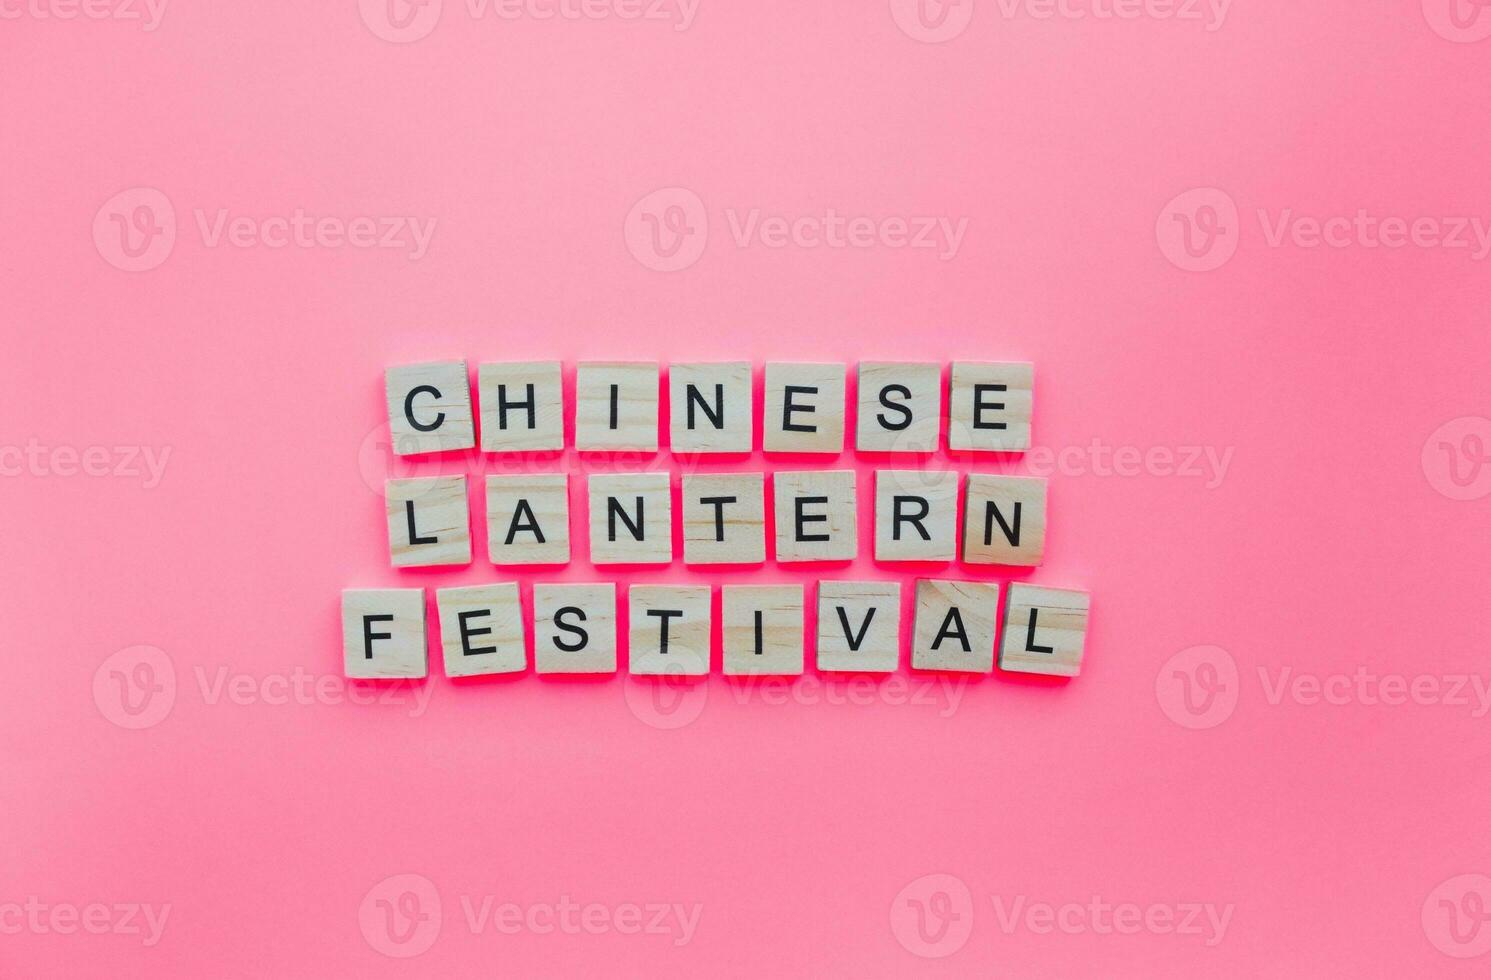 February 5, Yuan-Xiao Che, Chinese Lantern Festival, minimalistic banner with wooden letters photo